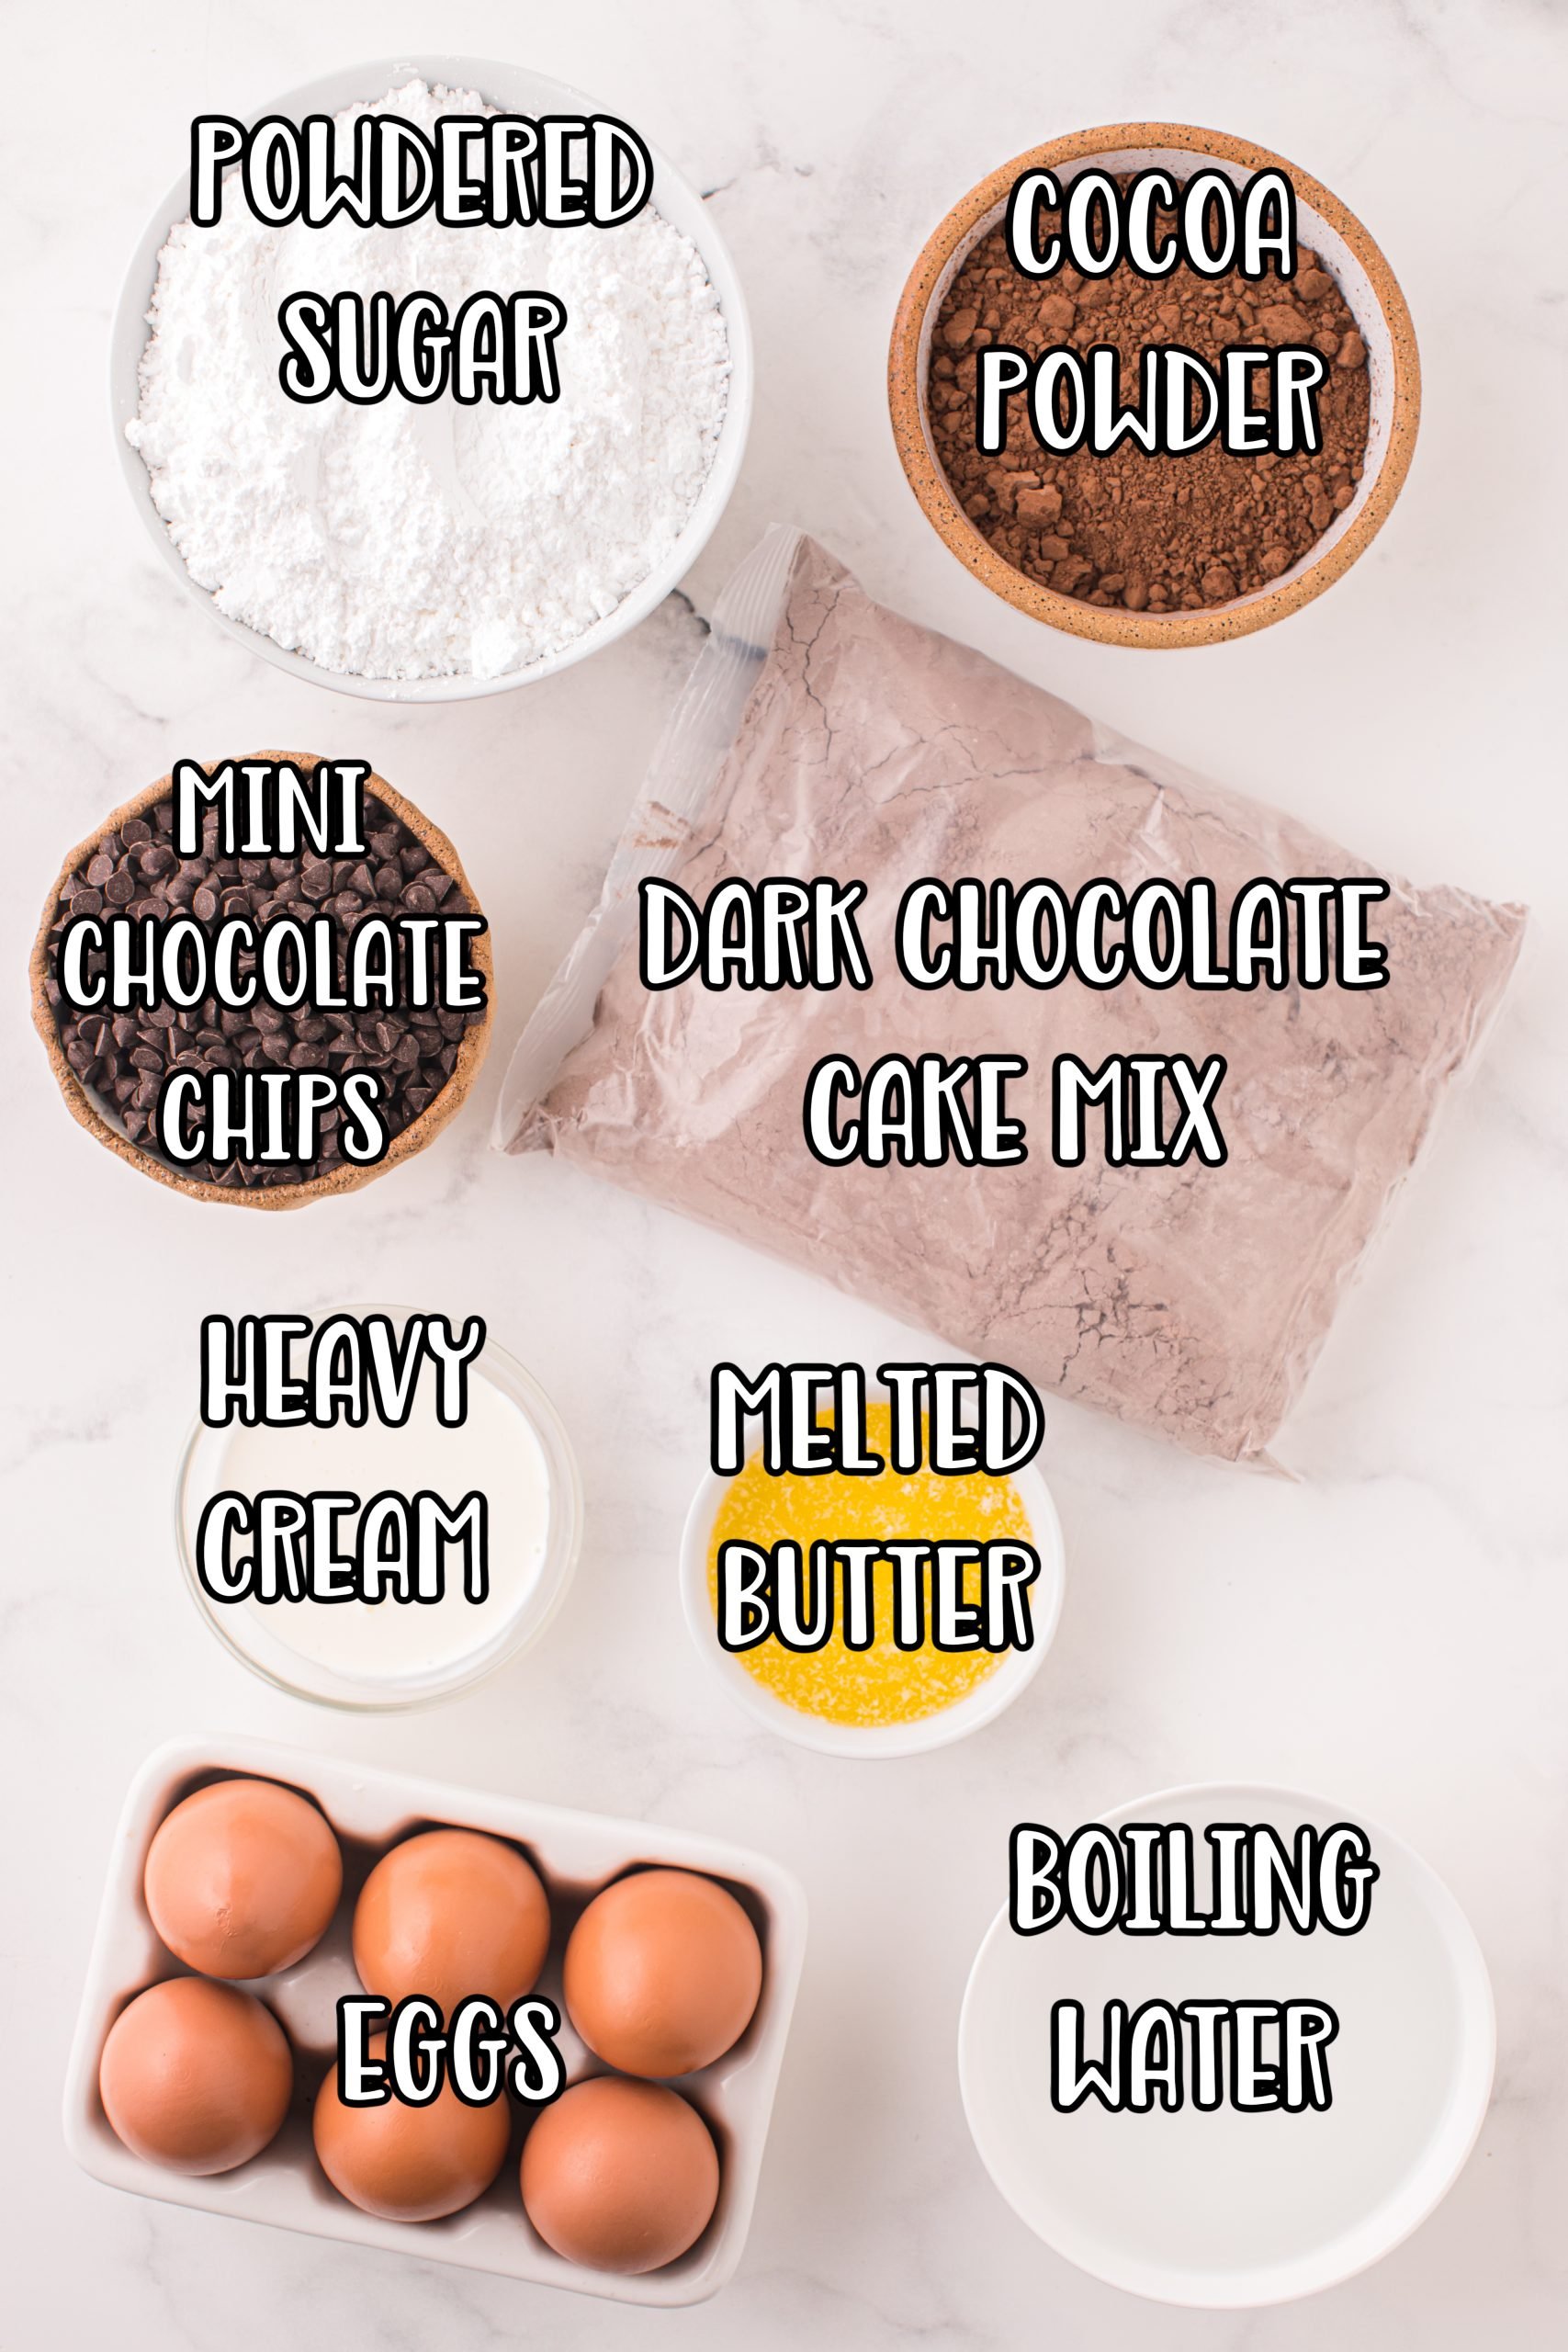 Powdered sugar, chocolate cake mix, cocoa powder, mini chocolate chips, heavy cream, melted butter, water, and eggs.